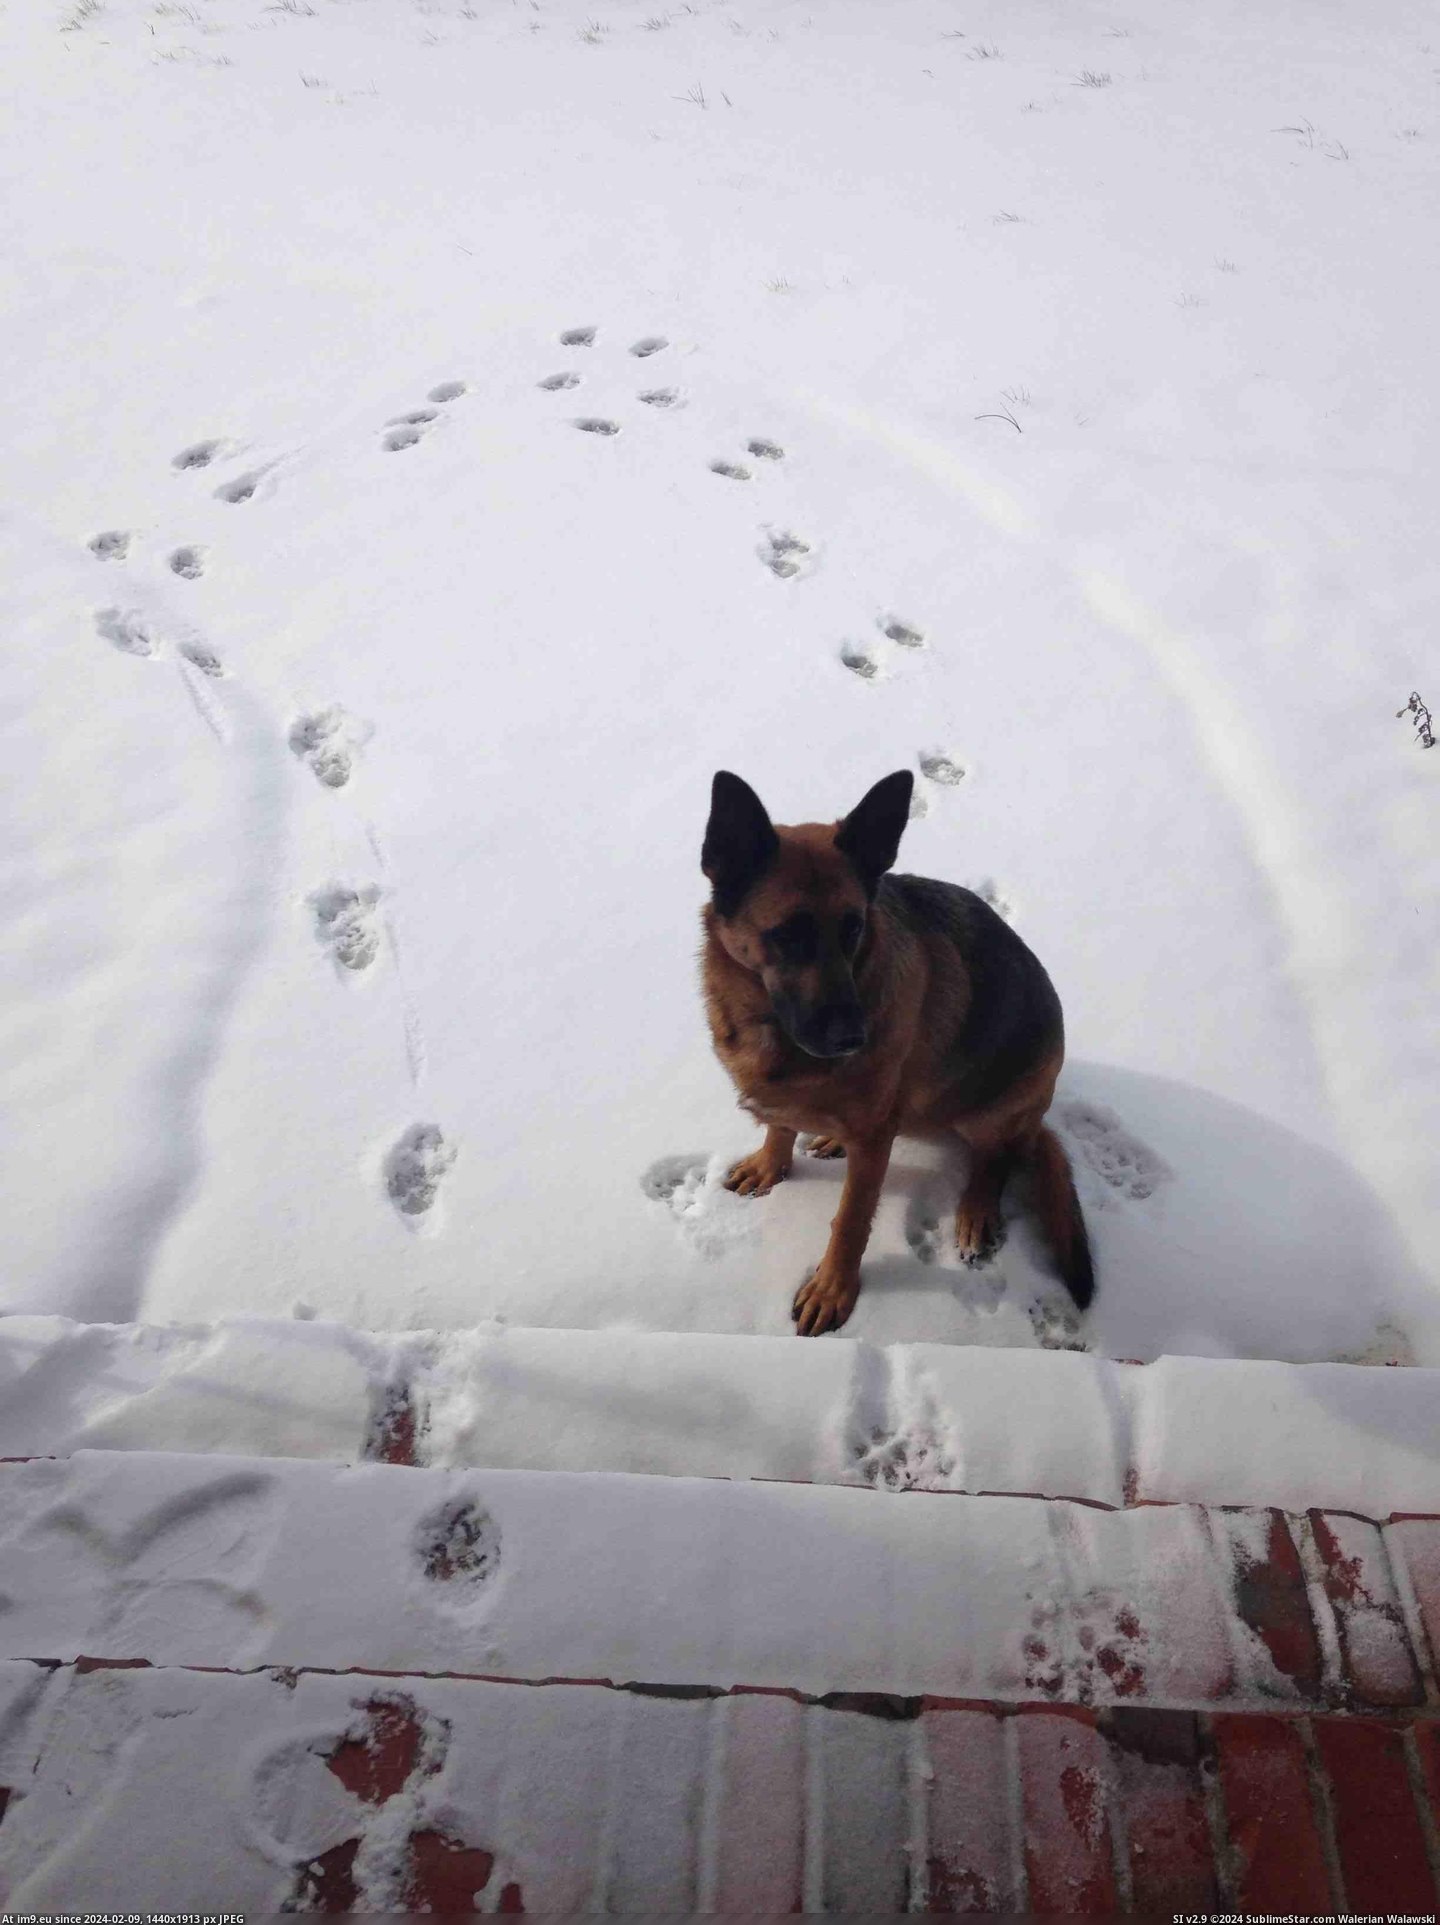 #Time #Dog #Instant #Snow #Nope [Aww] my dog's first time seeing snow....instant 'NOPE' Pic. (Bild von album My r/AWW favs))